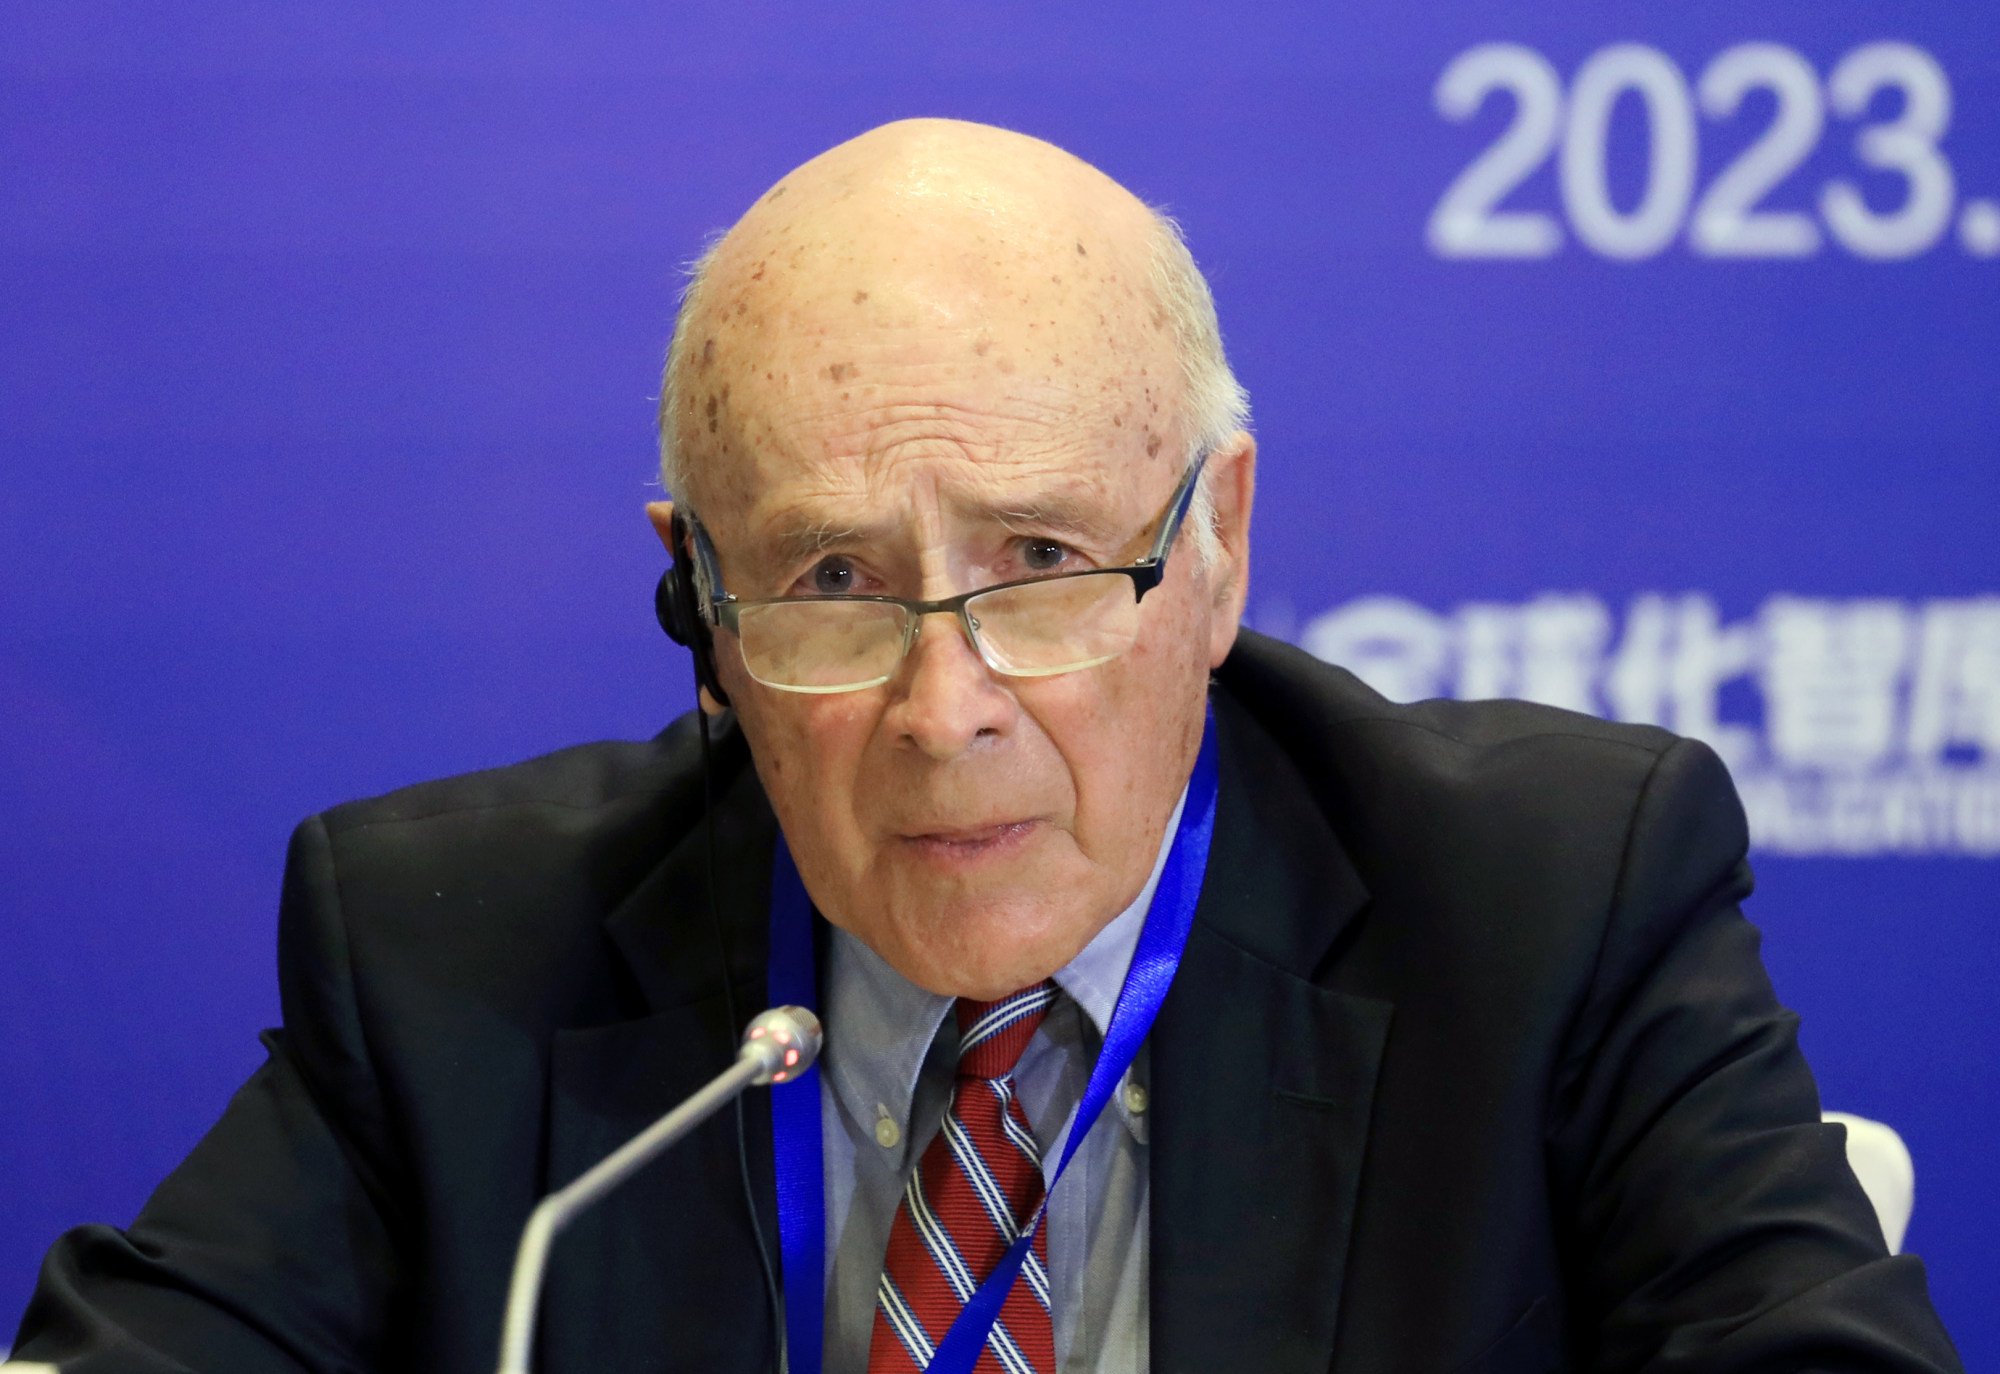 Joseph Nye, former Dean of the John F. Kennedy School of Government at Harvard University, speaks during the China Global Think Tank Innovation Forum on October 23, 2023 in Beijing. Photo: Getty Images